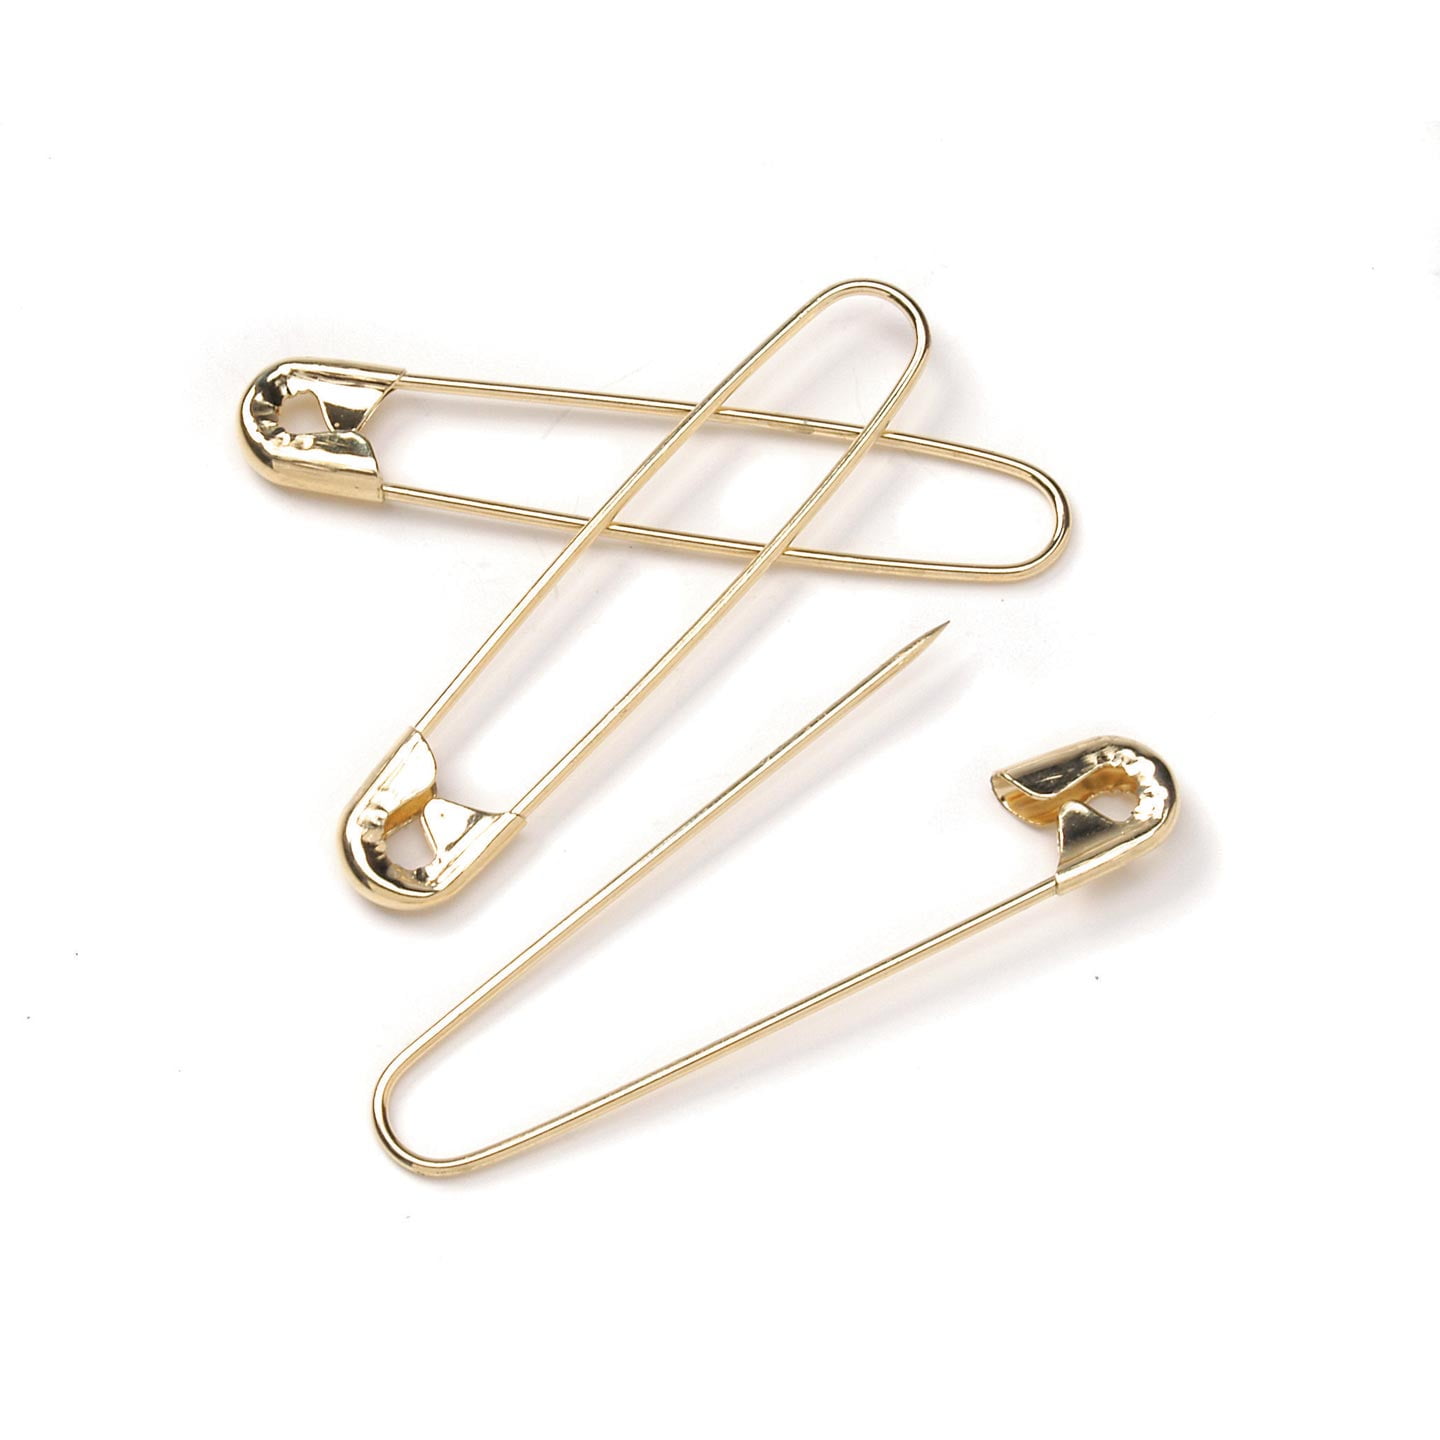 Cousin DIY Gold Safety Pins 1.5-inch 25-Count 40000861 – Good's